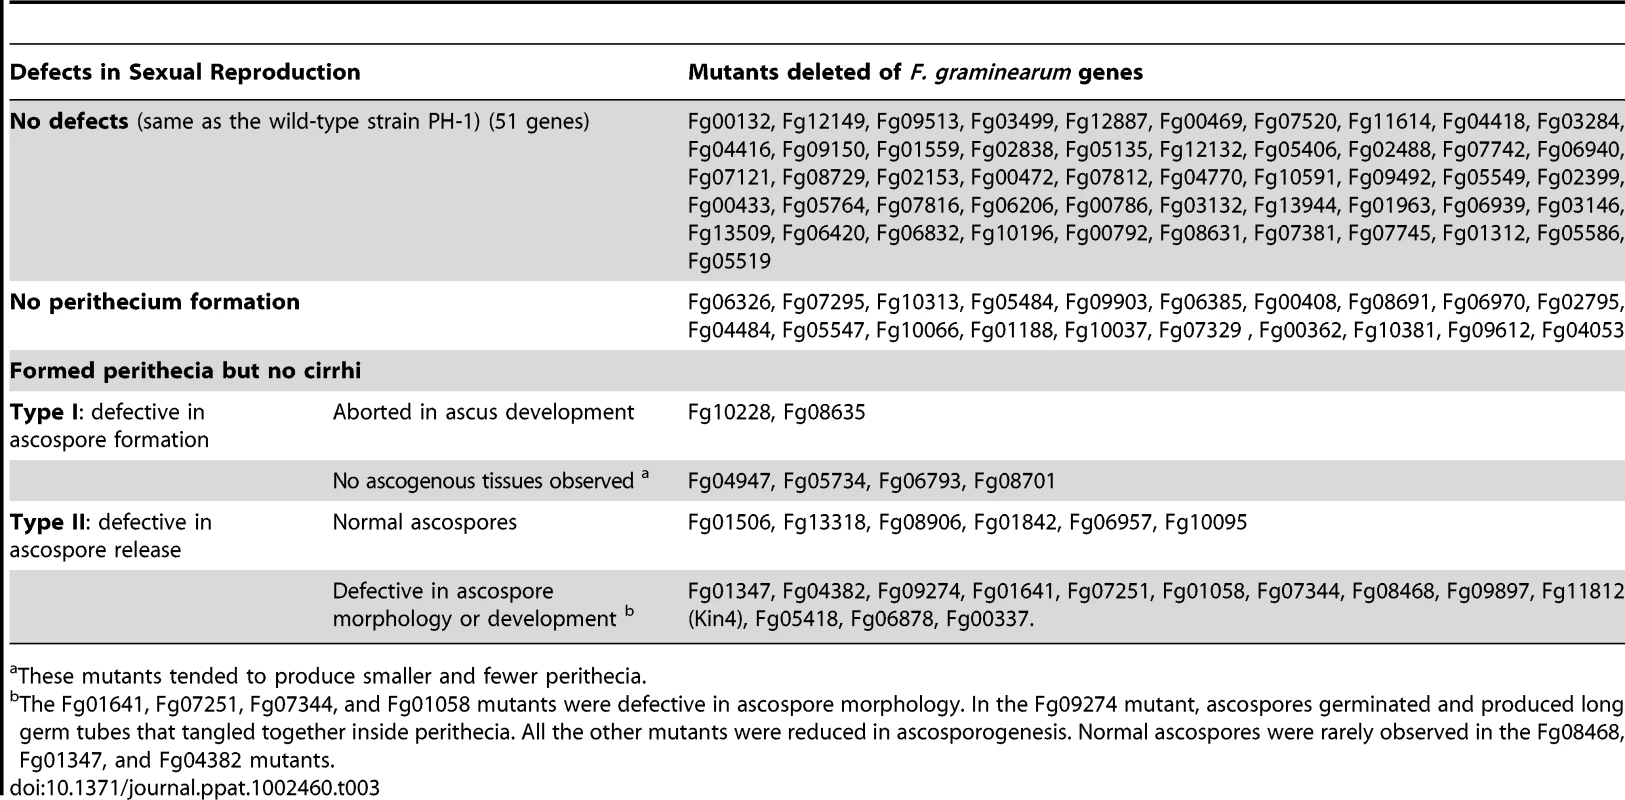 Phenotypes of the 96 protein kinase mutants in sexual reproduction.